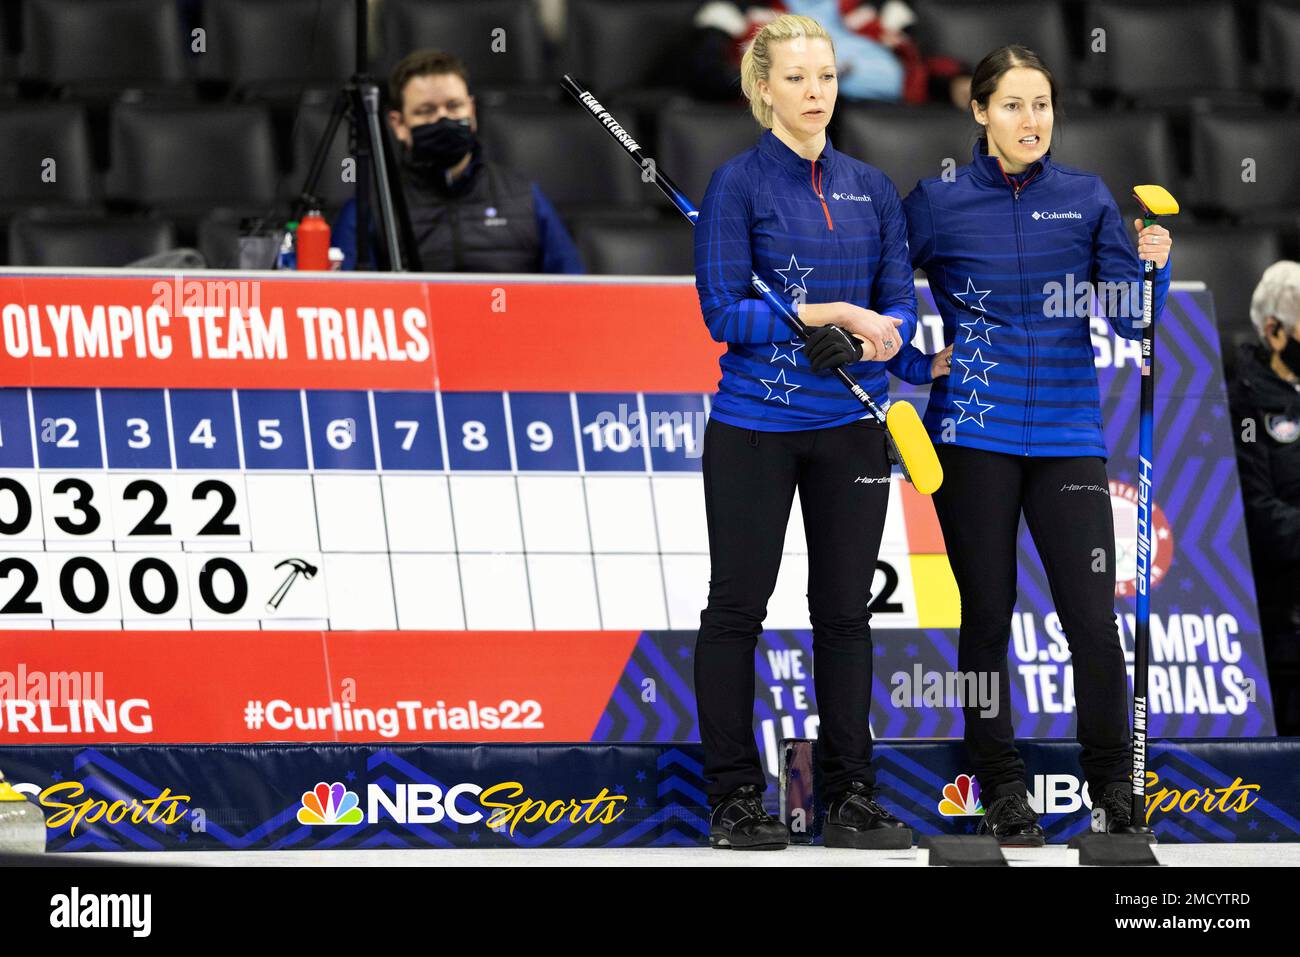 Team Petersons Nina Roth, left, and Tabitha Peterson watch as Team Sinclair takes their turn at the U.S. Olympic Curling Team Trials at Baxter Arena in Omaha, Neb., Wednesday, Nov